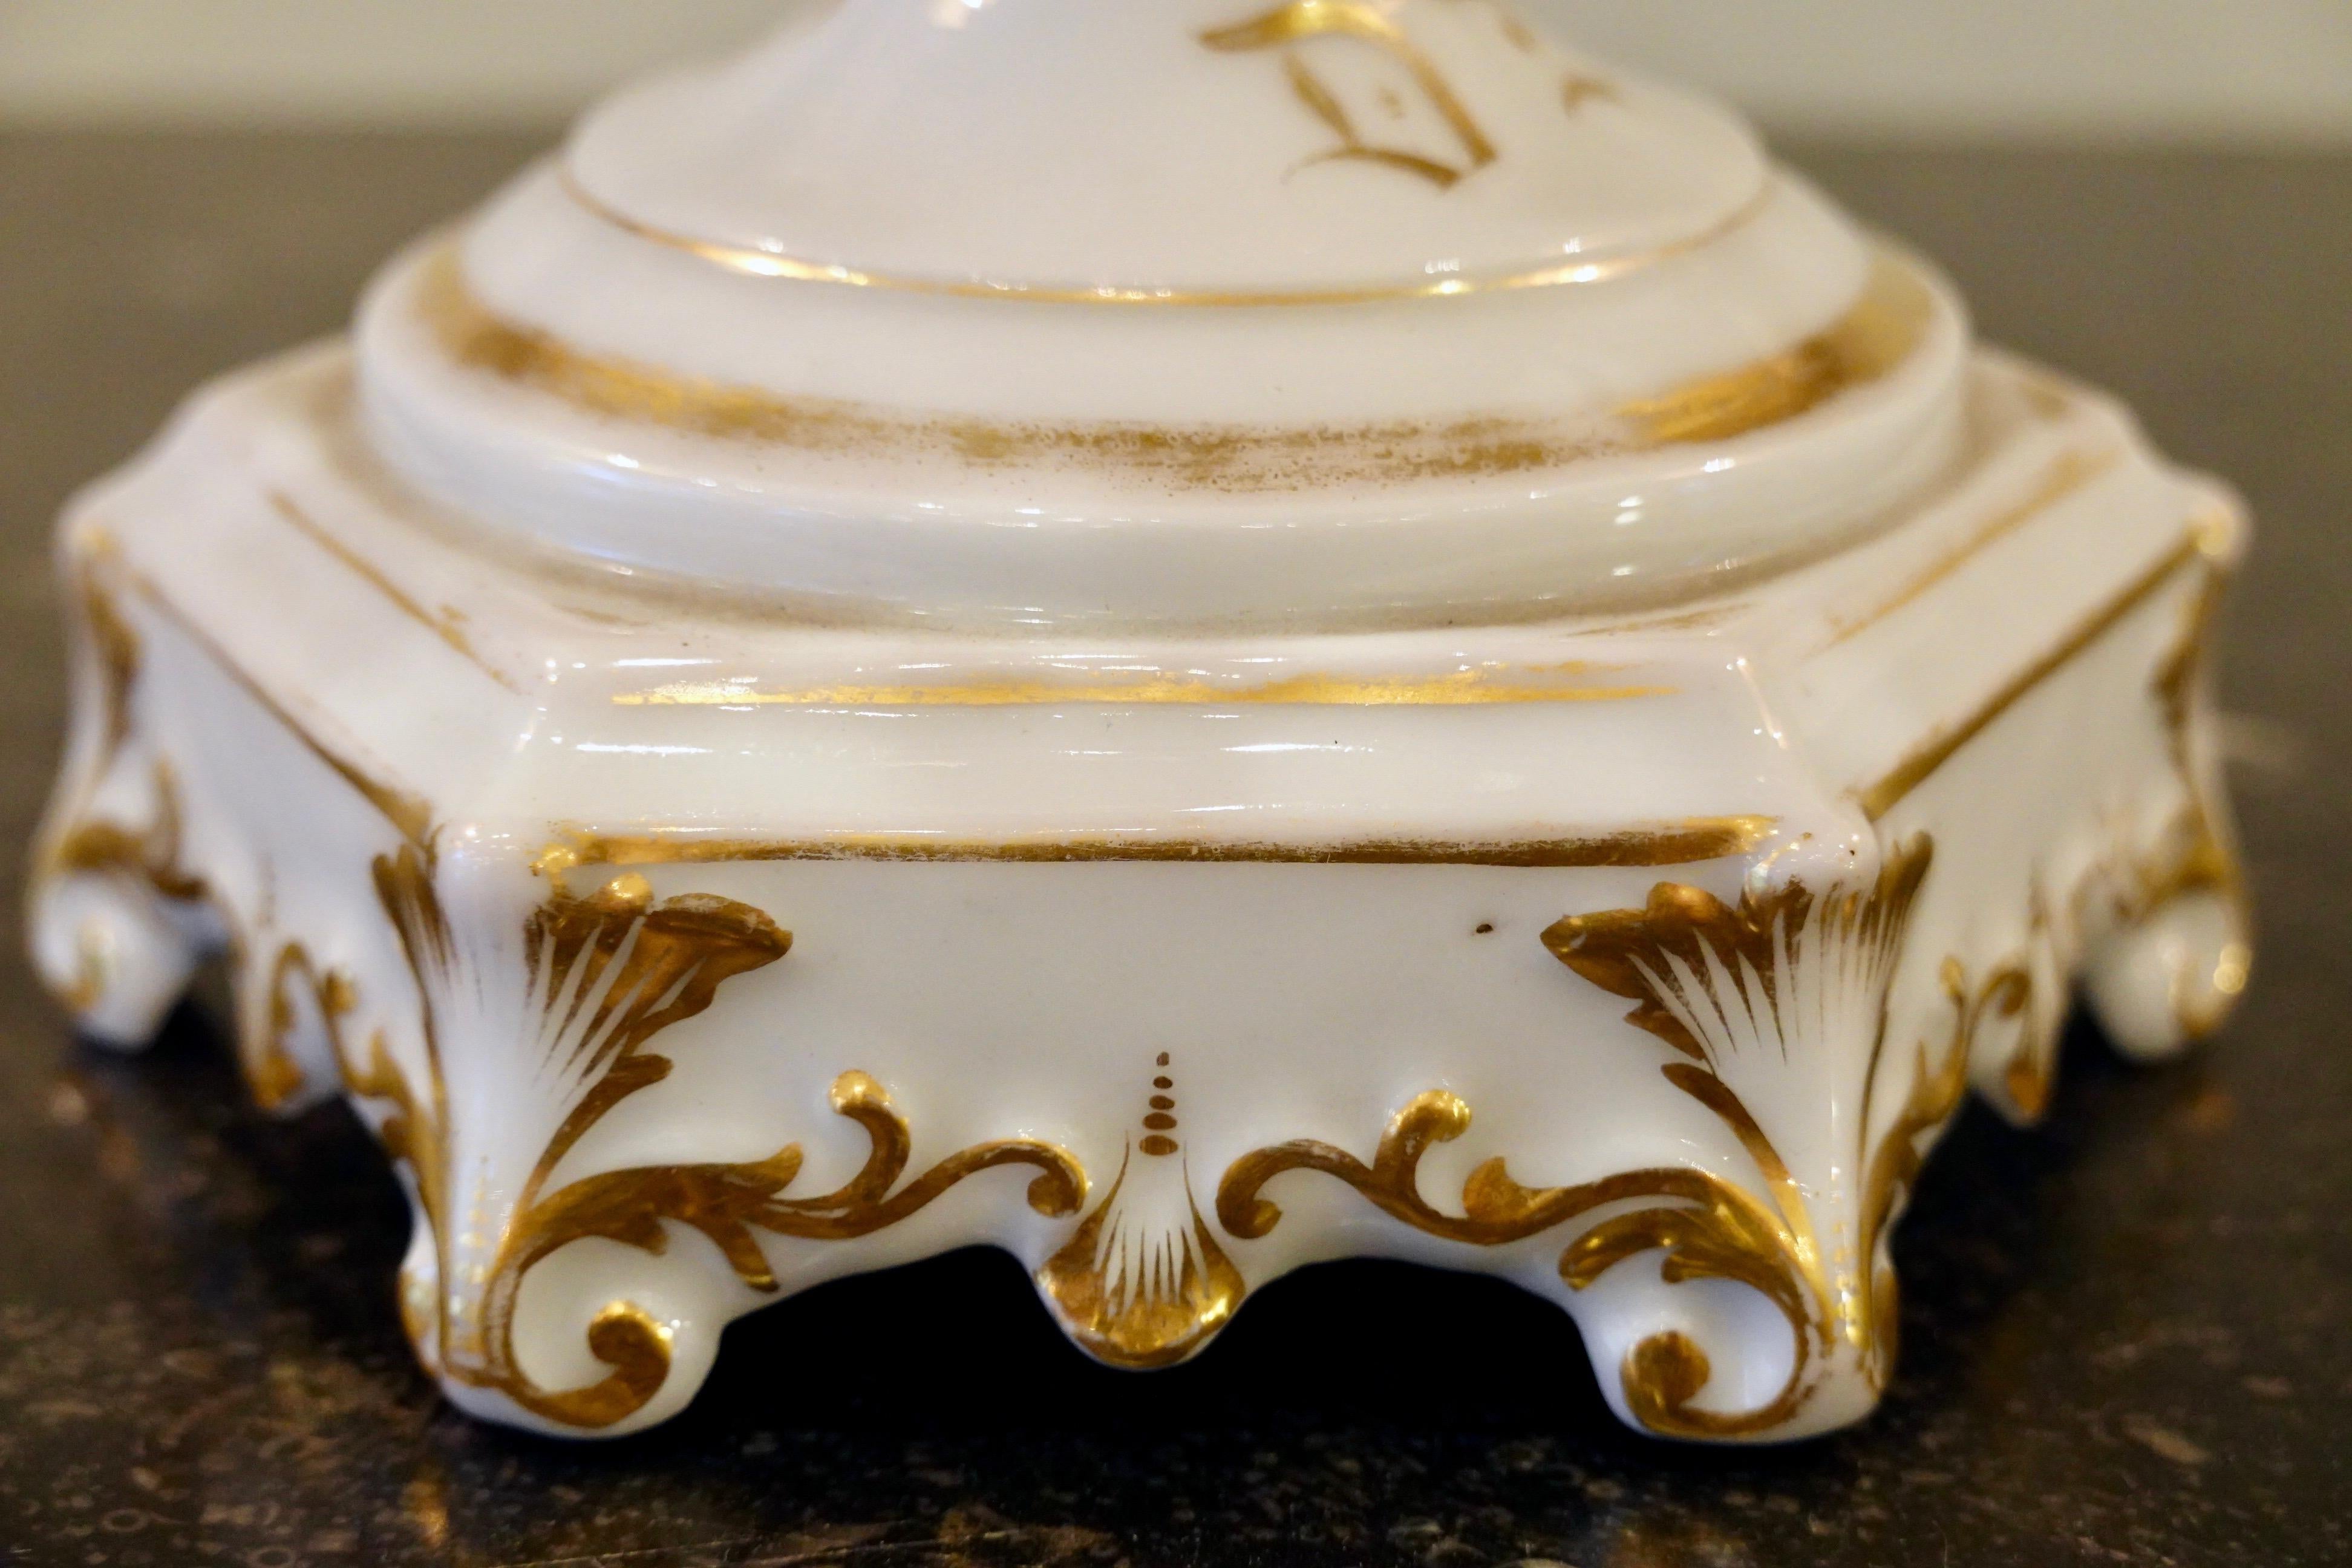 Paris Porcelain and Parcel Gilt Reticulated Compote or Fruit Basket In Good Condition For Sale In Pembroke, MA